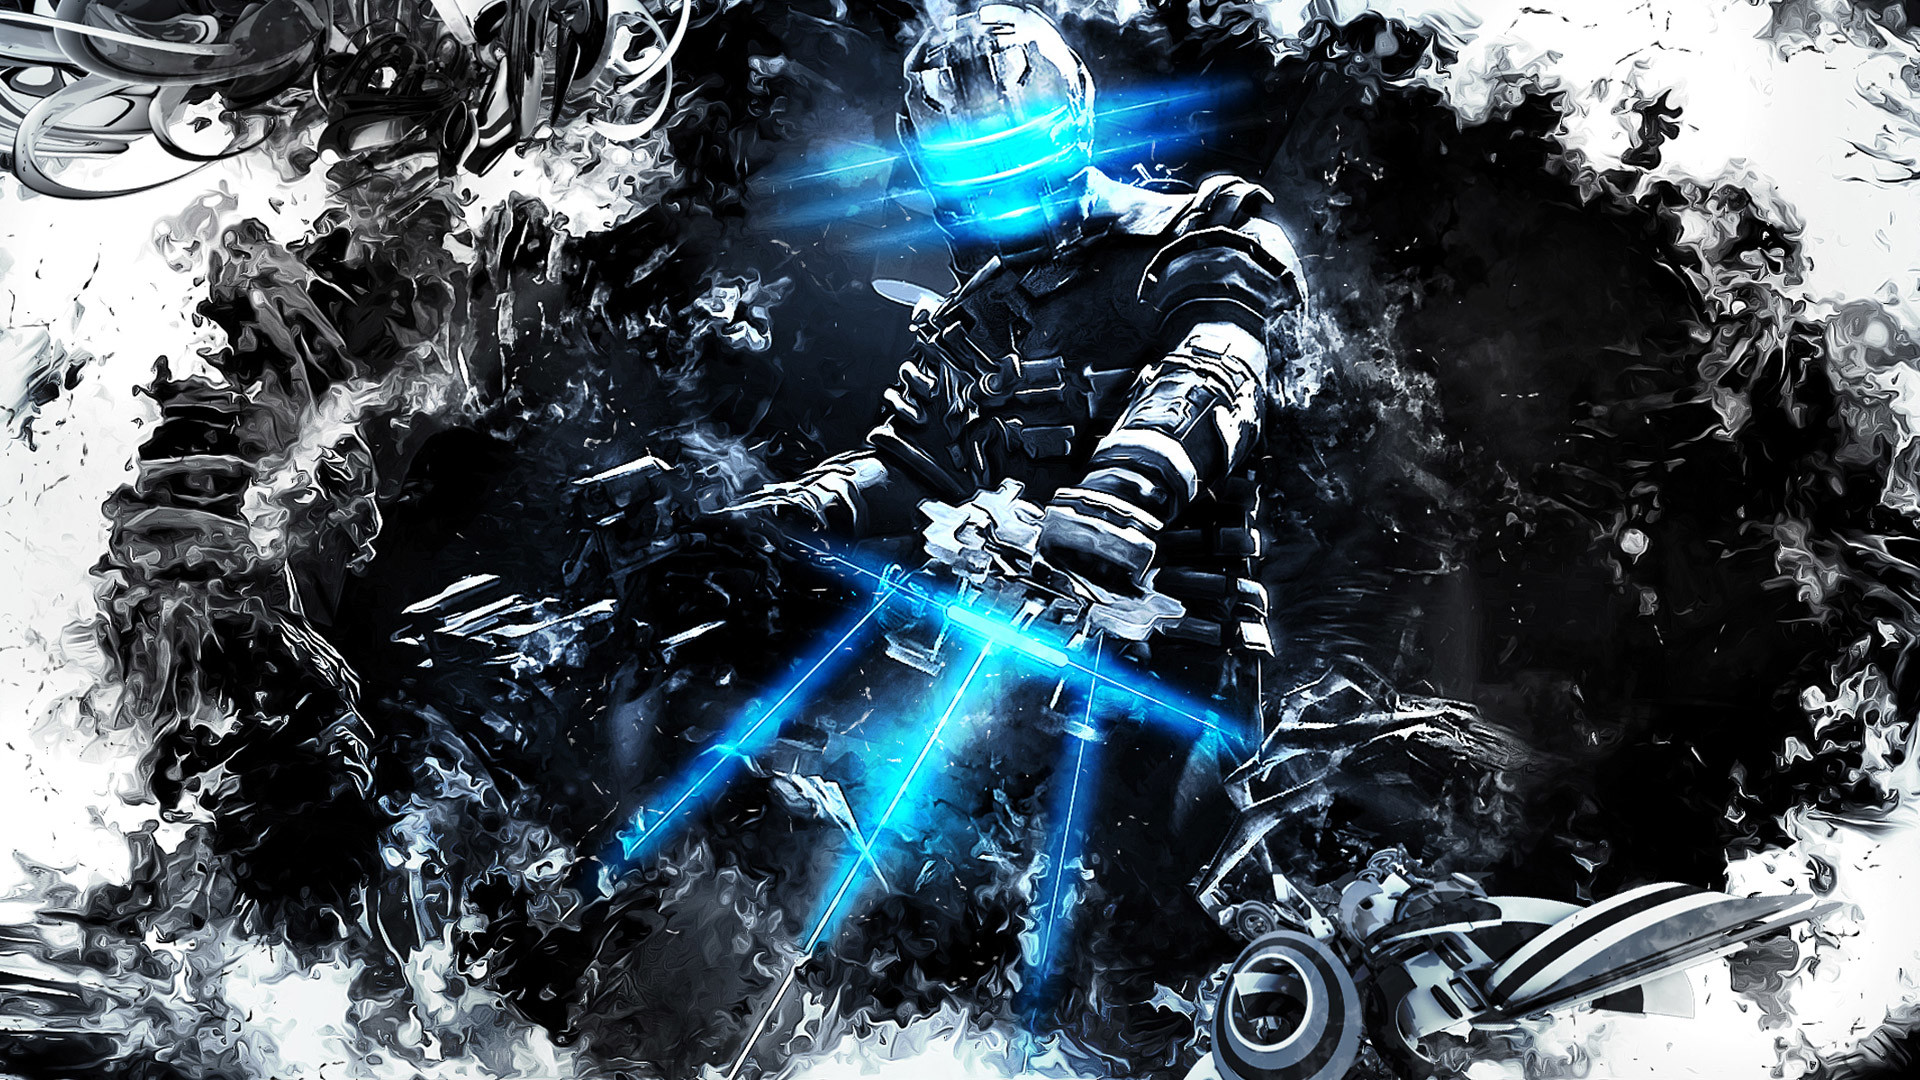 1920x1080 Awesome Dead Space 3 Wallpaper